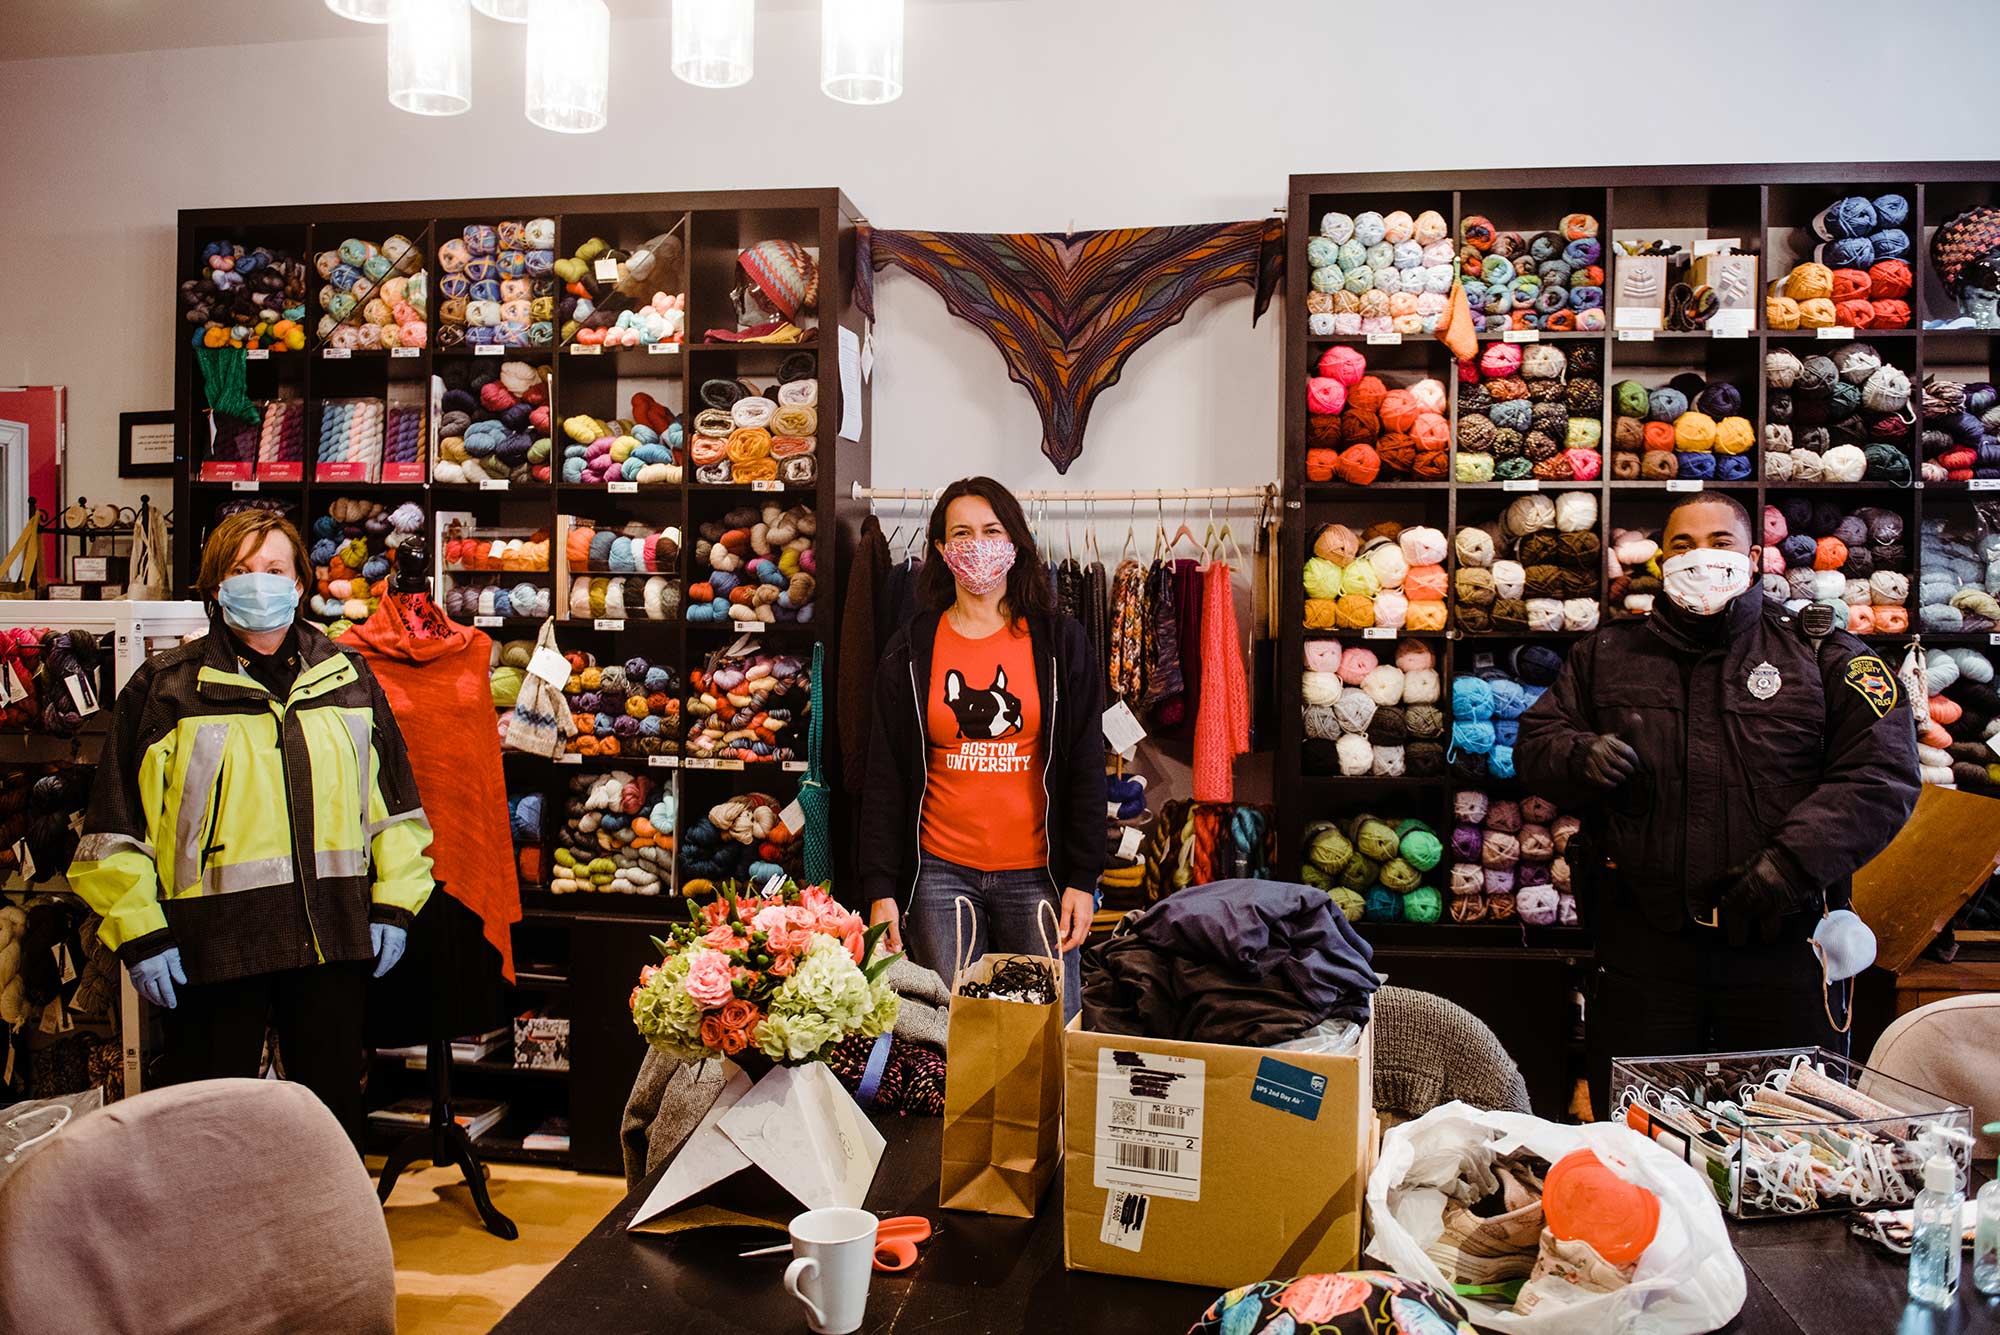 Image of Boston City Councilor and BU alum, Annissa Essaibi-George, who has started sew face masks for the Boston University Police Department at the Stitch House, a shop in Dorchester which she founded. Two BU PD officers stand at her left and right; the wall behind them is filled with skeins of yarn.